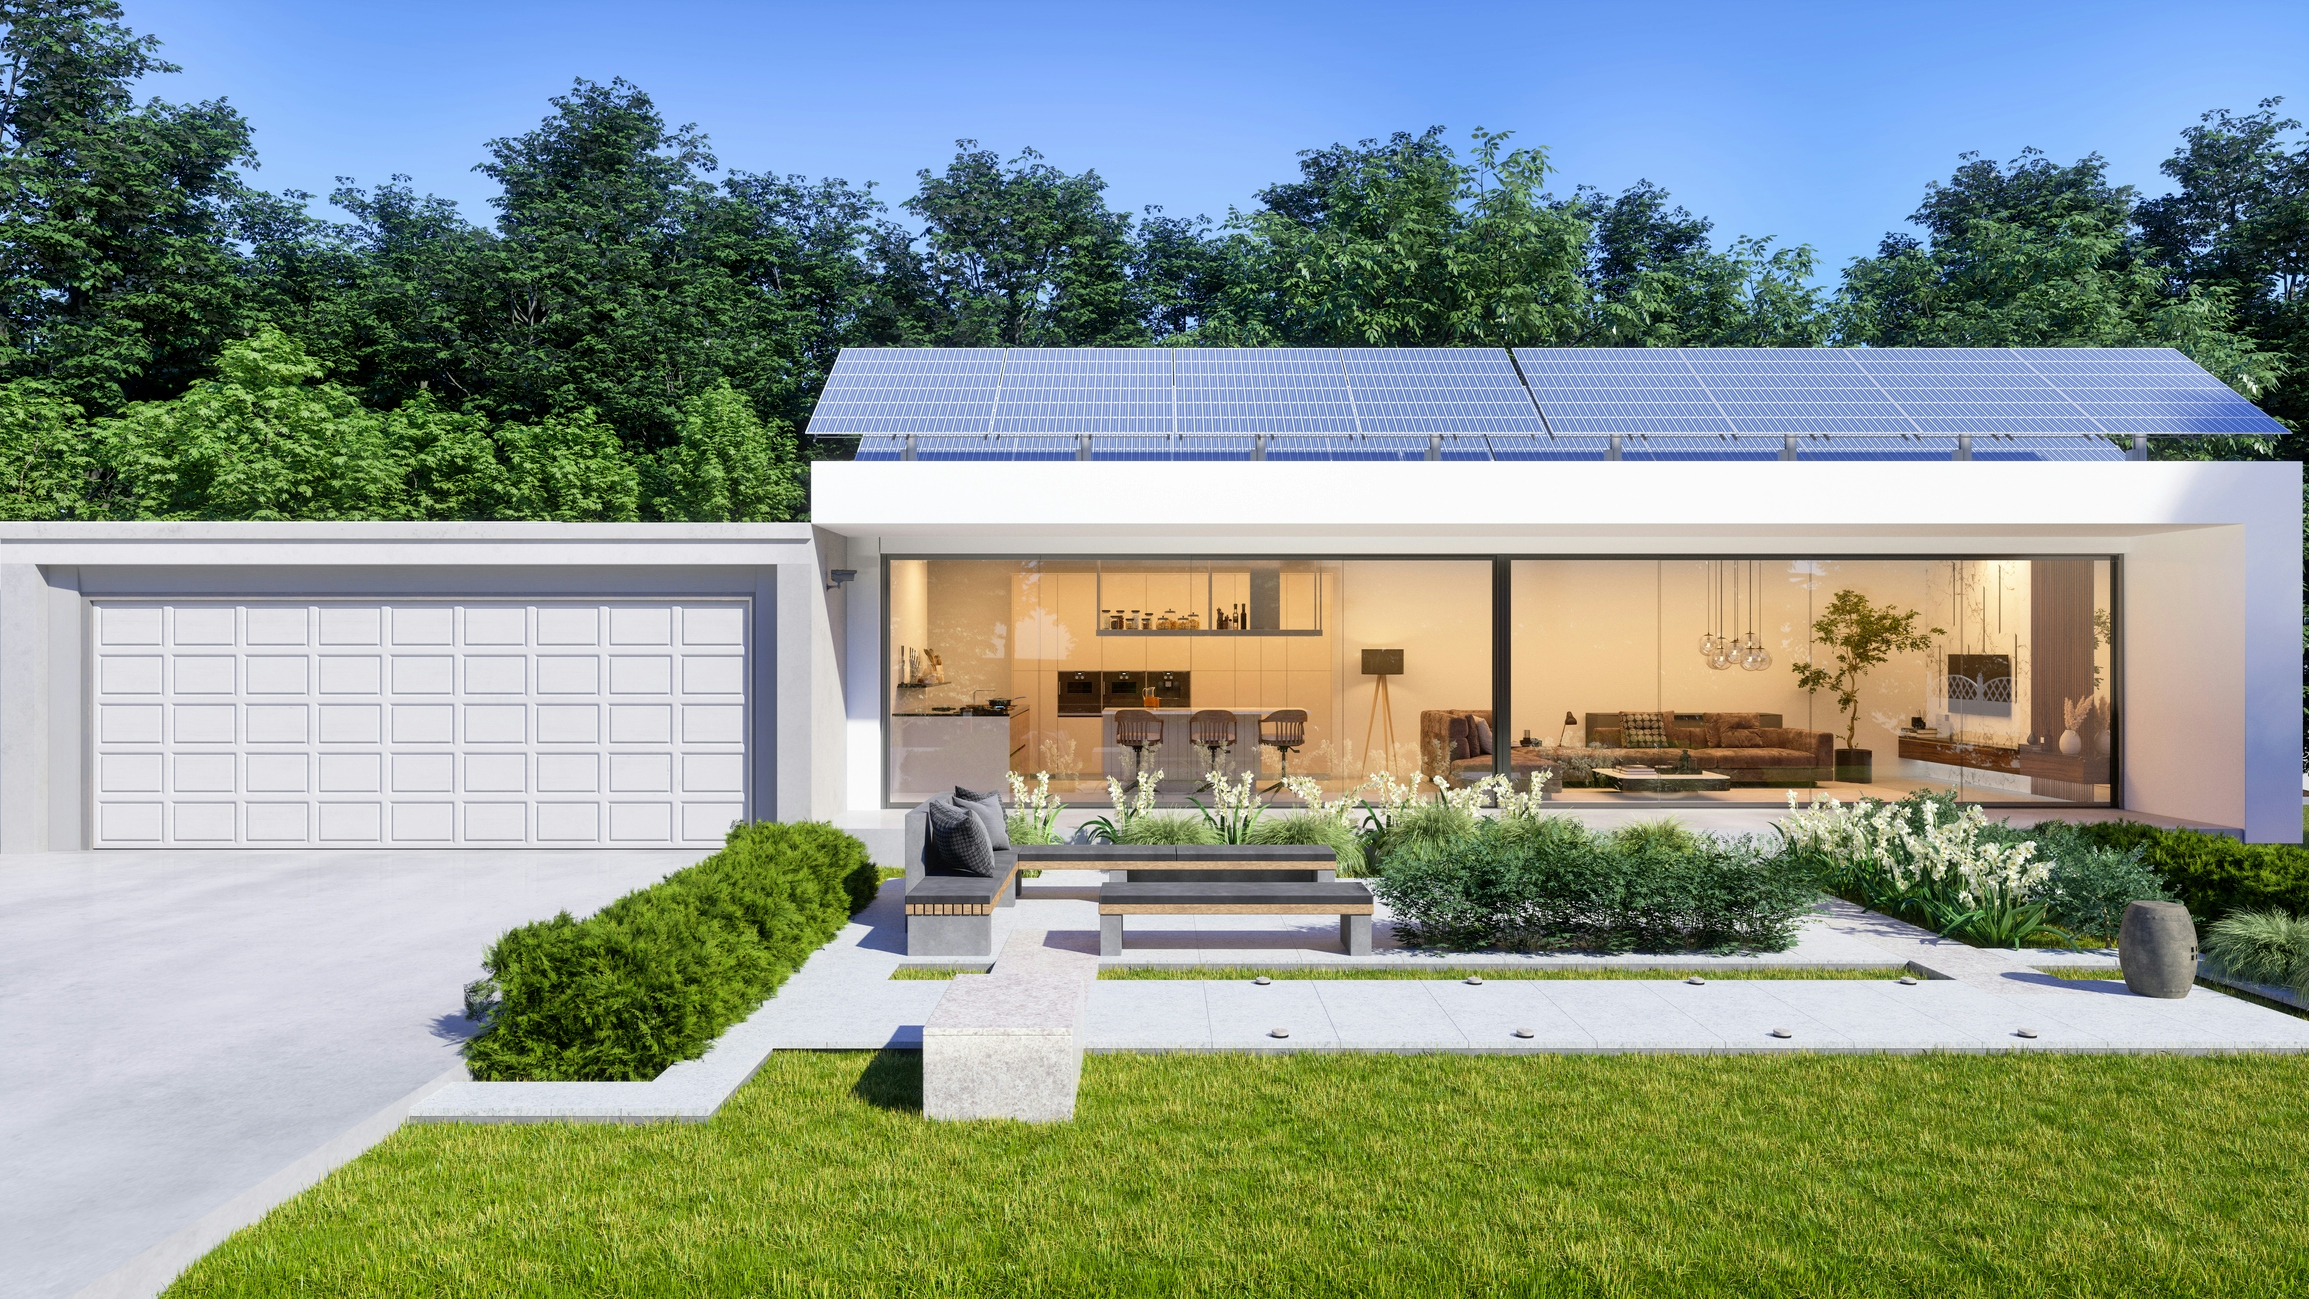 Blog Hero: How Much Are Solar Panels for a House